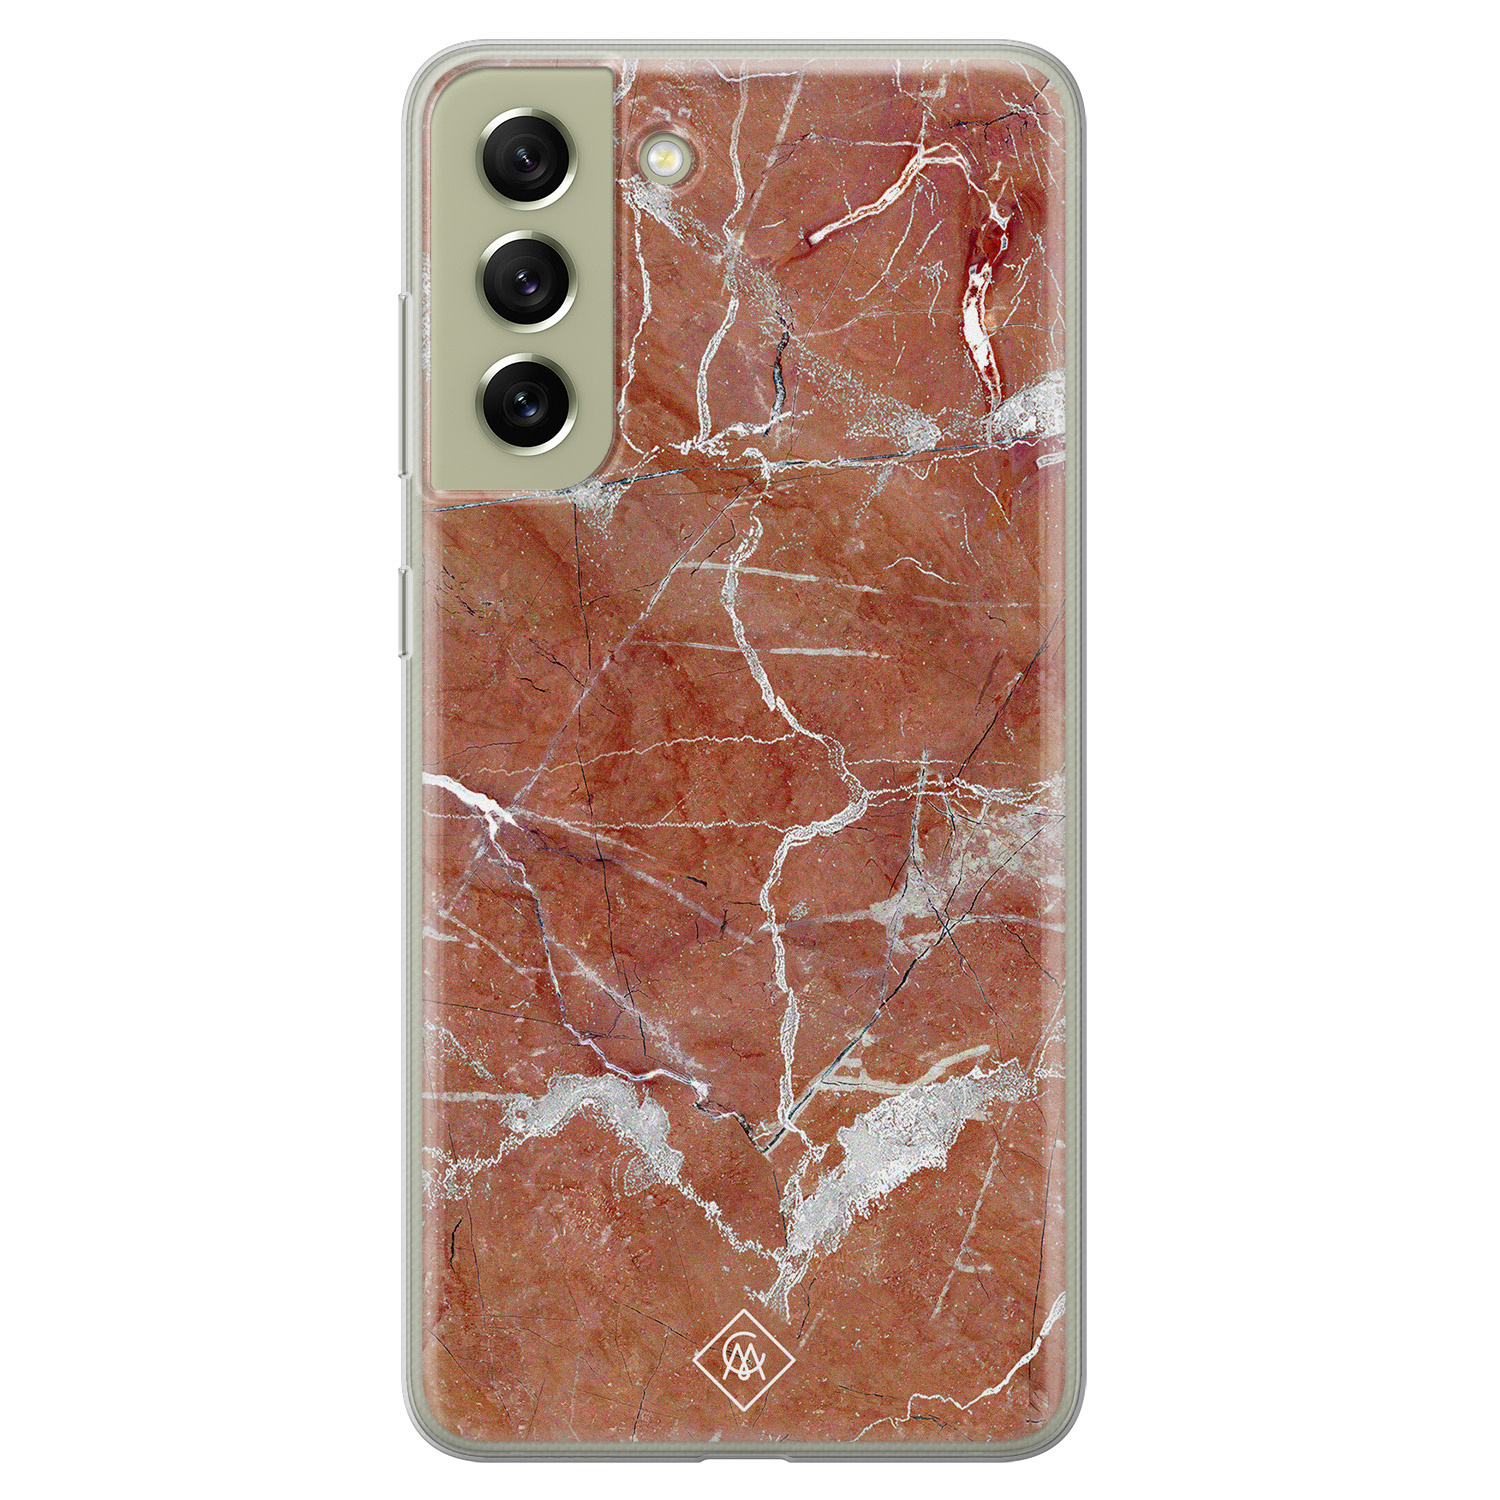 Samsung Galaxy S21 FE siliconen hoesje - Marble sunkissed